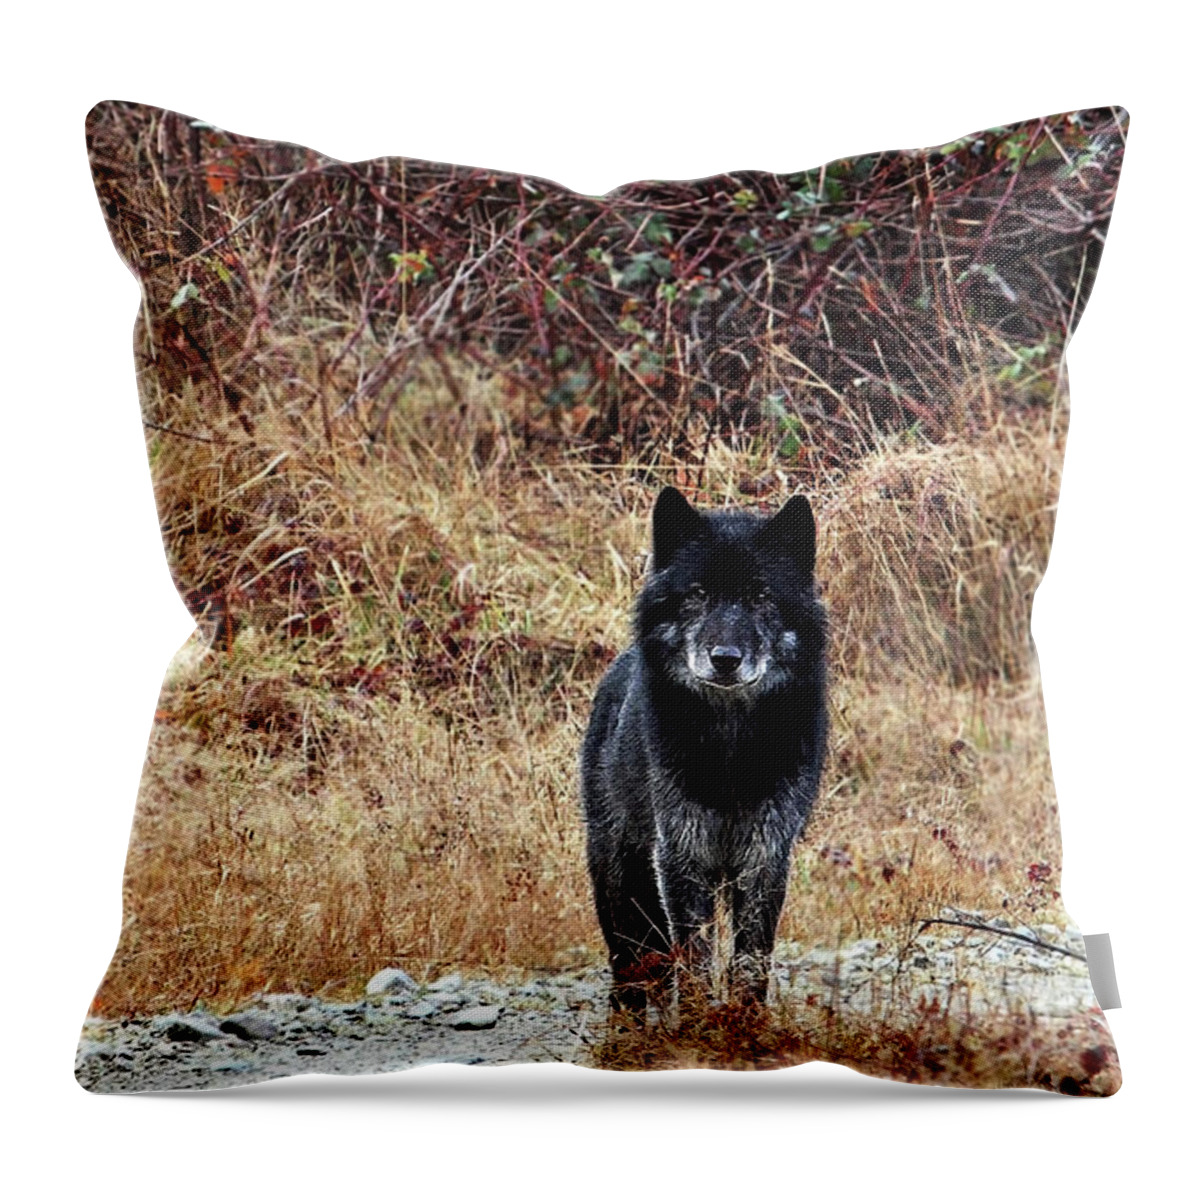 Wolf Throw Pillow featuring the photograph Lone Black Wolf by Peggy Collins